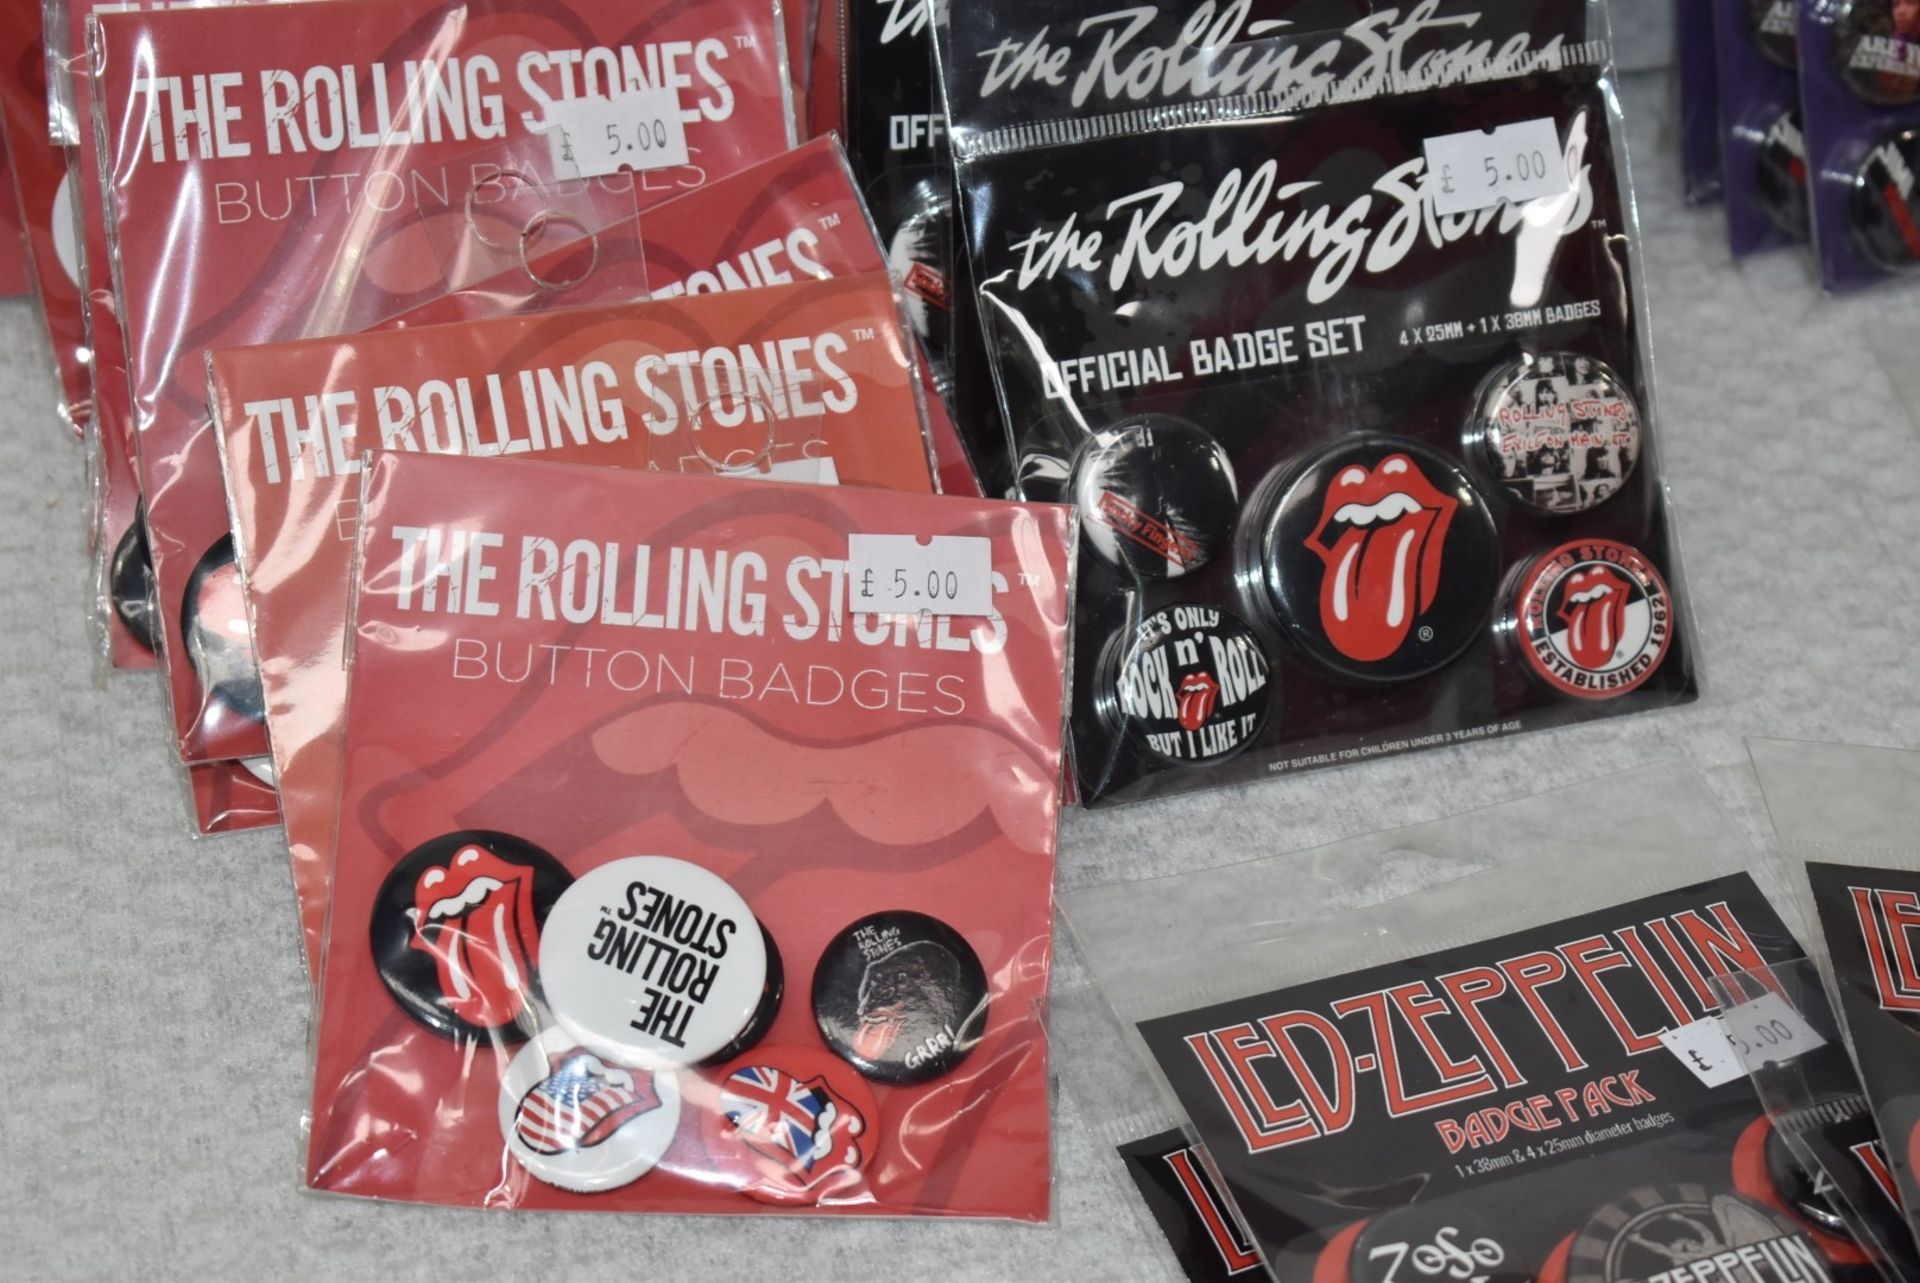 56 x Button Badge Sets Featuring Rolling Stones, Jimi Hendrix, Pink Floyd, Led Zeppelin - RRP £280 - Image 4 of 9